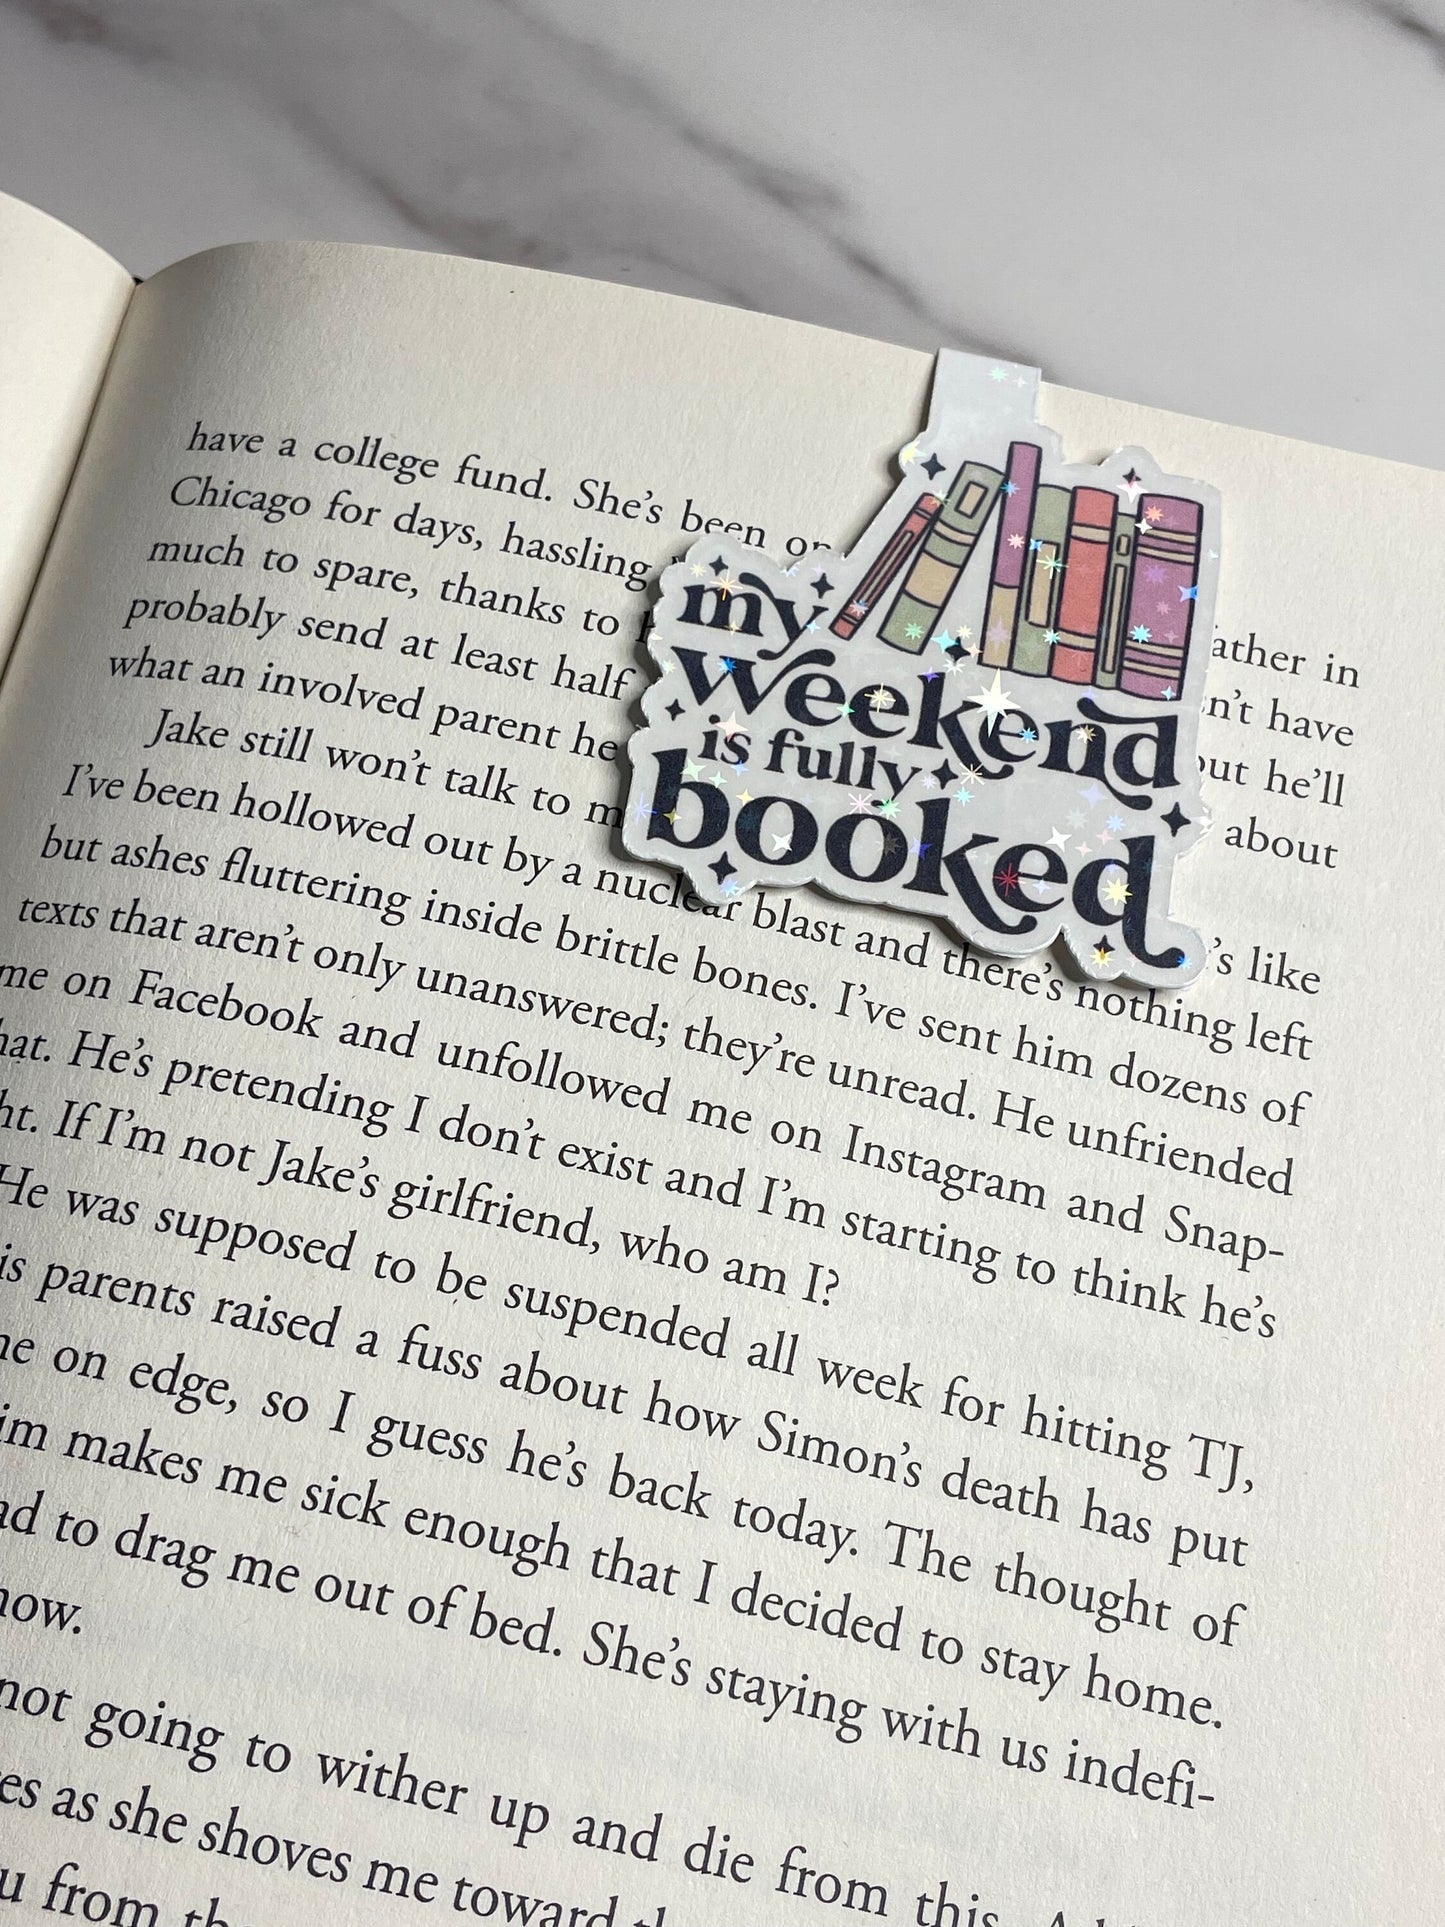 My Weekend is Booked Magnetic Bookmark | Bookish Gift | Book Accessory | Book Lover | Booktok | Reader Gift